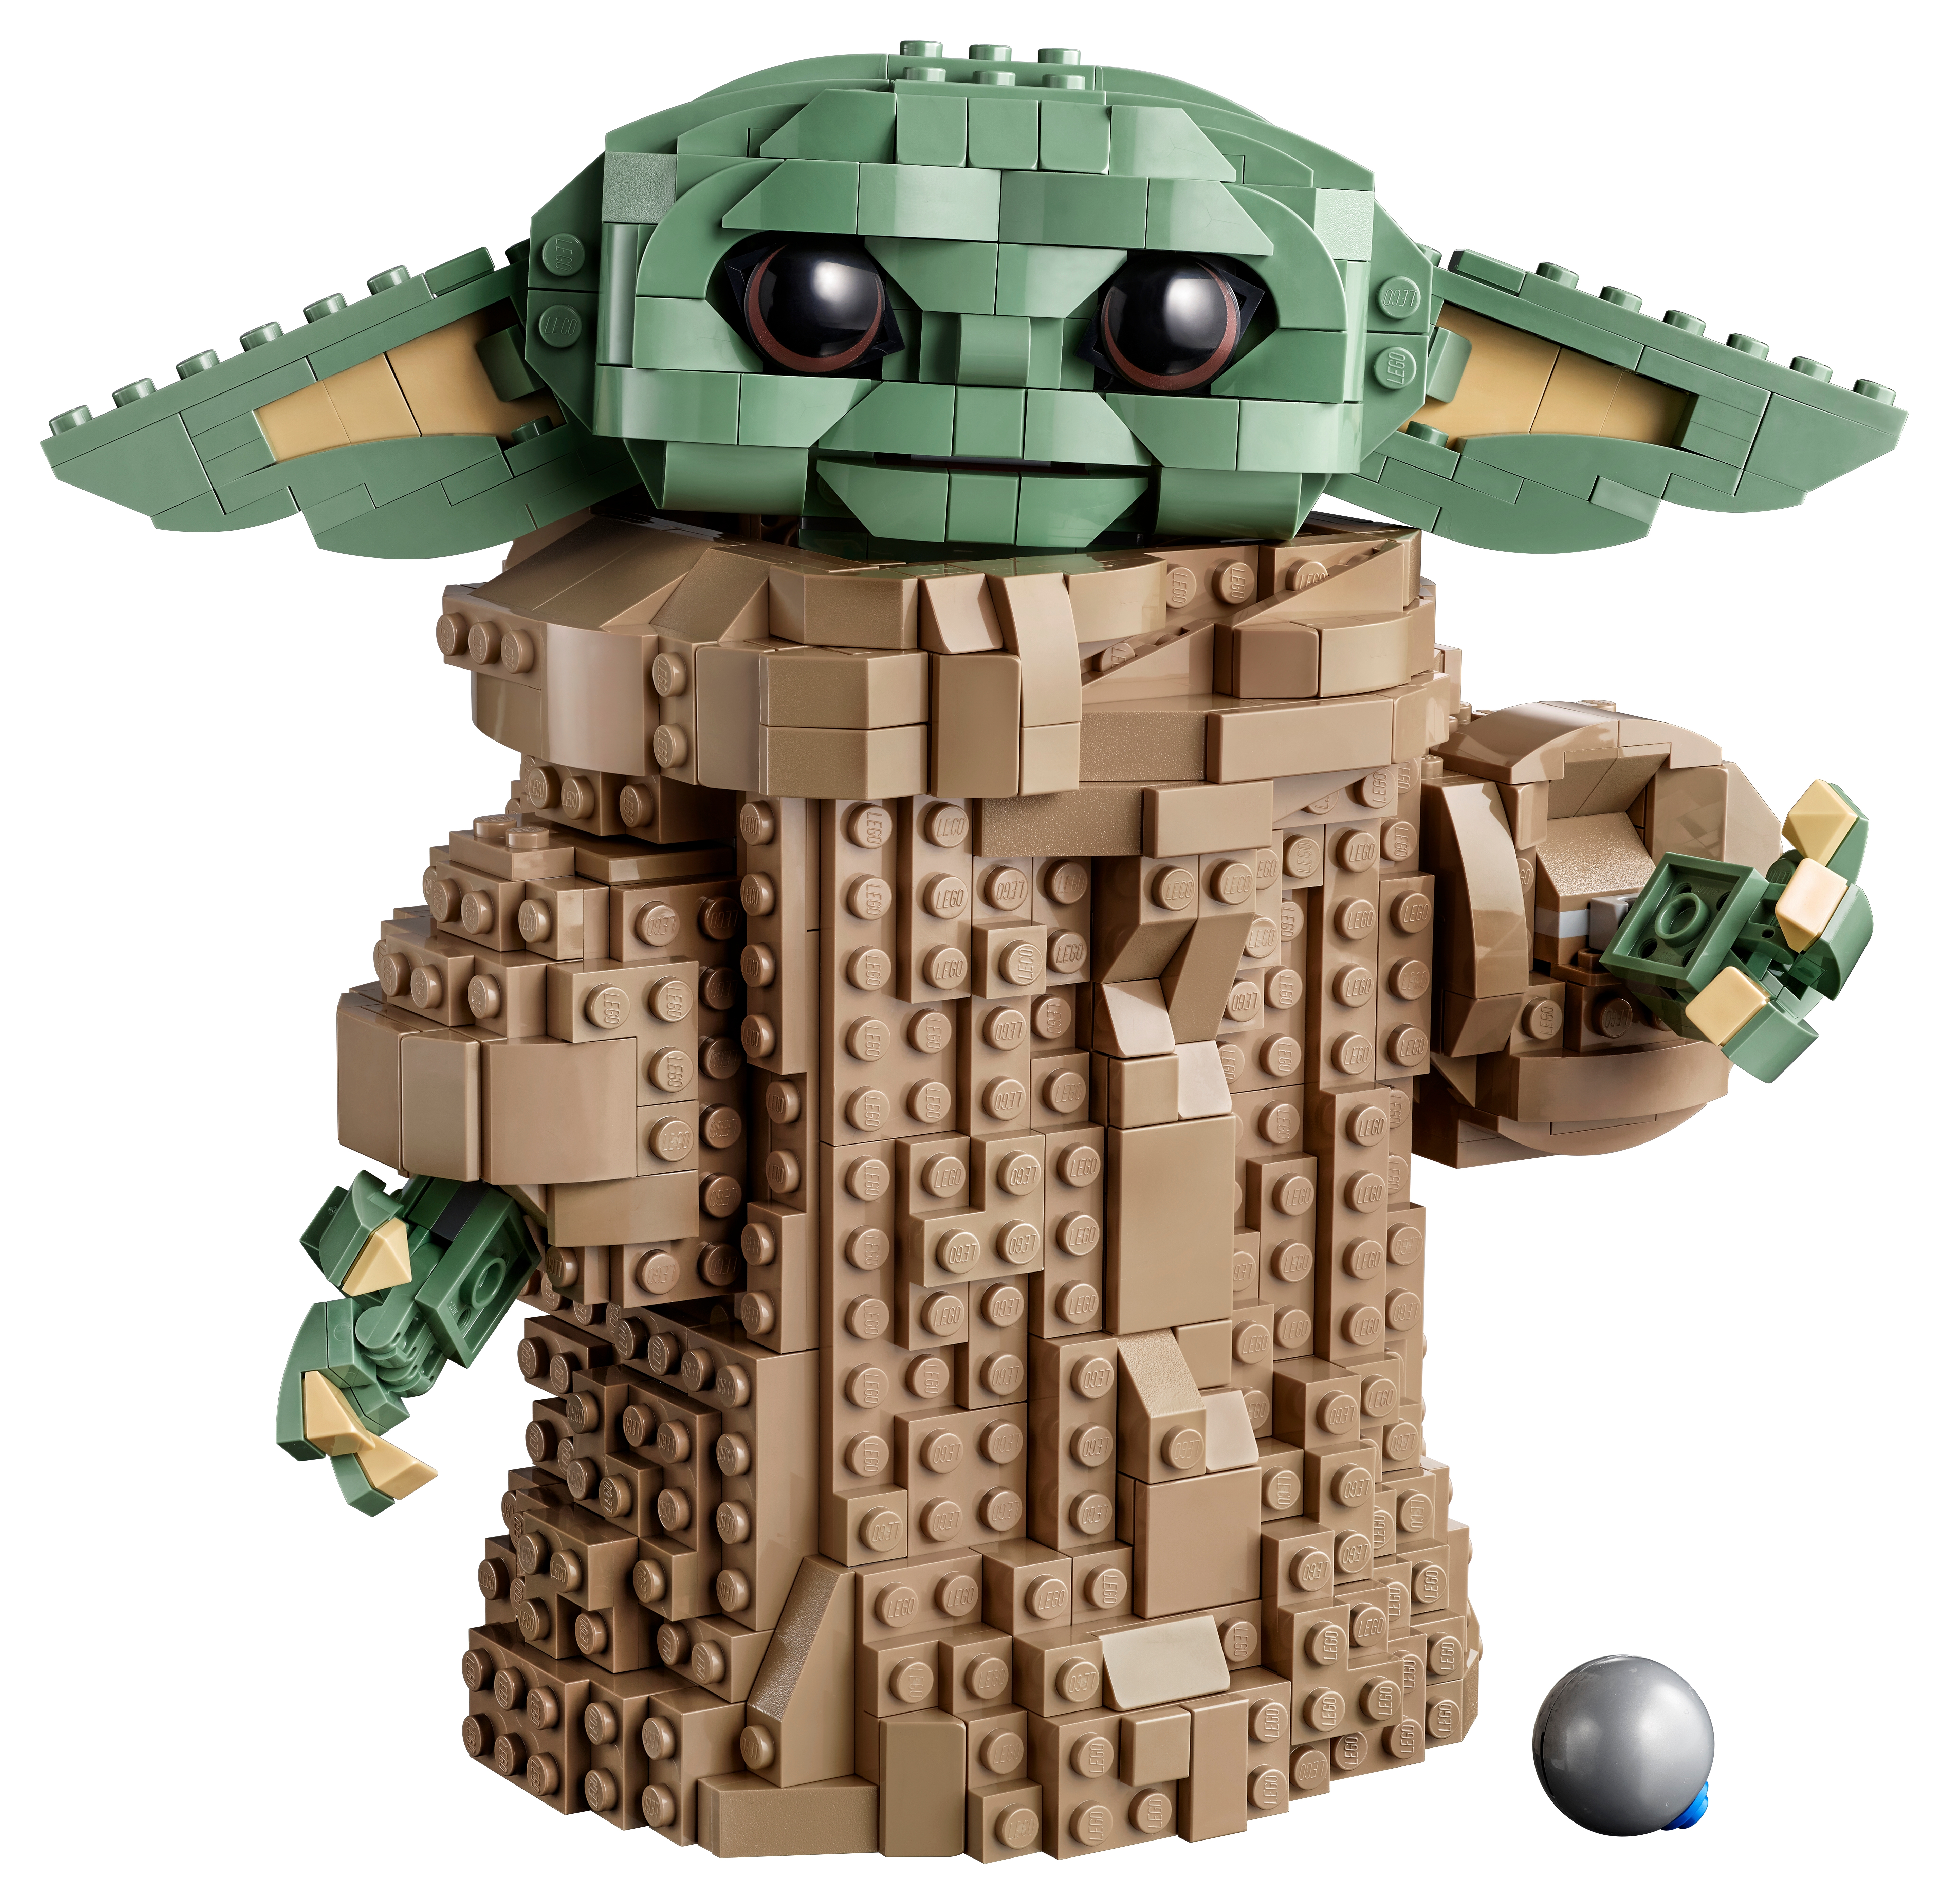 The Child 75318 | Star Wars™ | Buy online at the Official LEGO